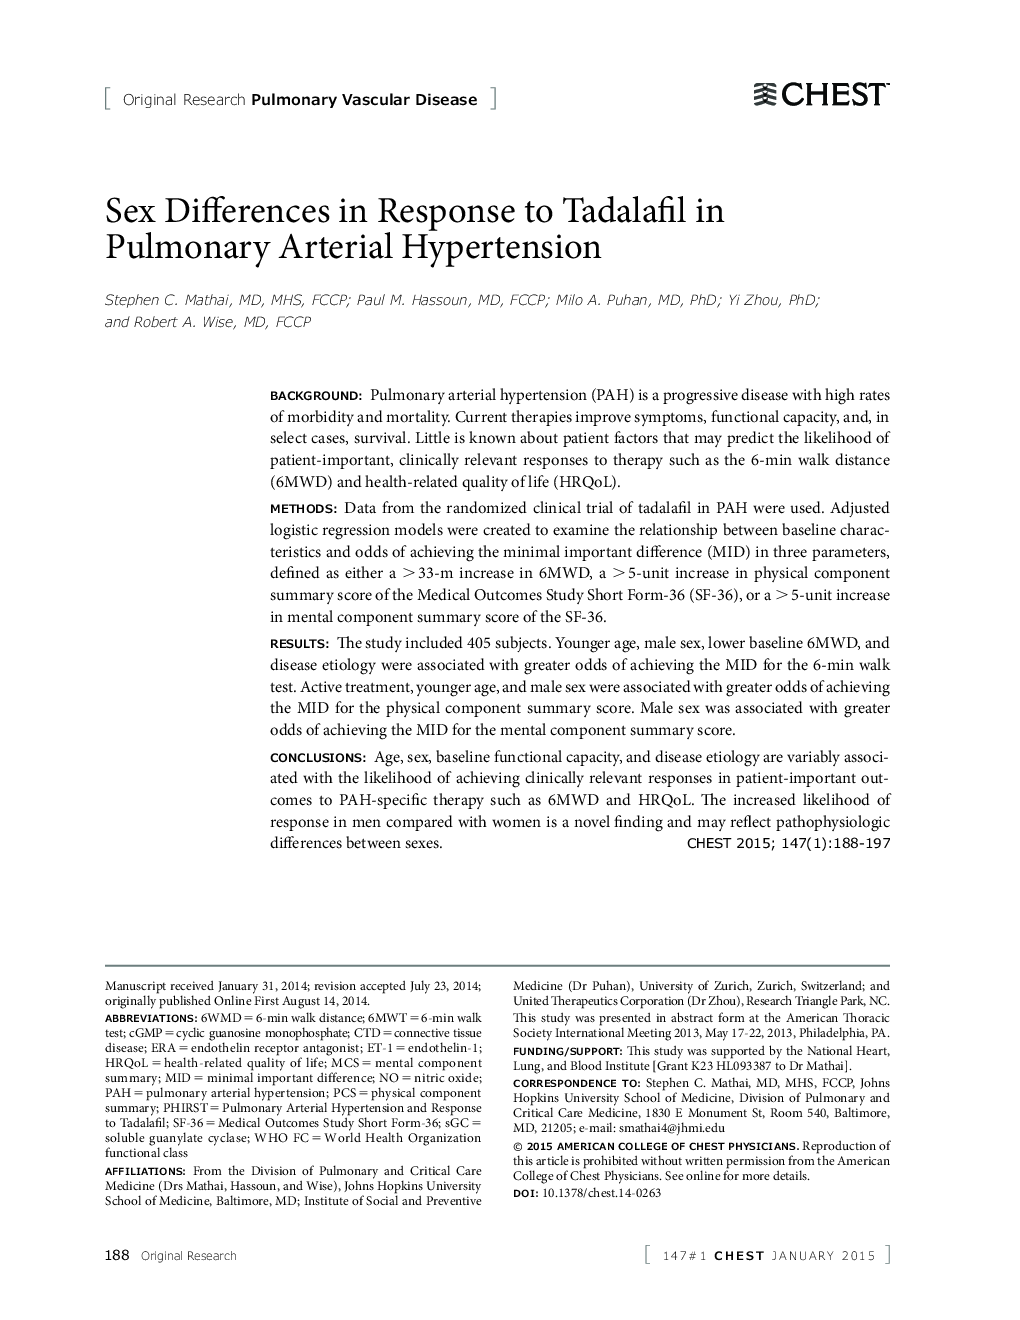 Sex Differences in Response to Tadalafil in Pulmonary Arterial Hypertension